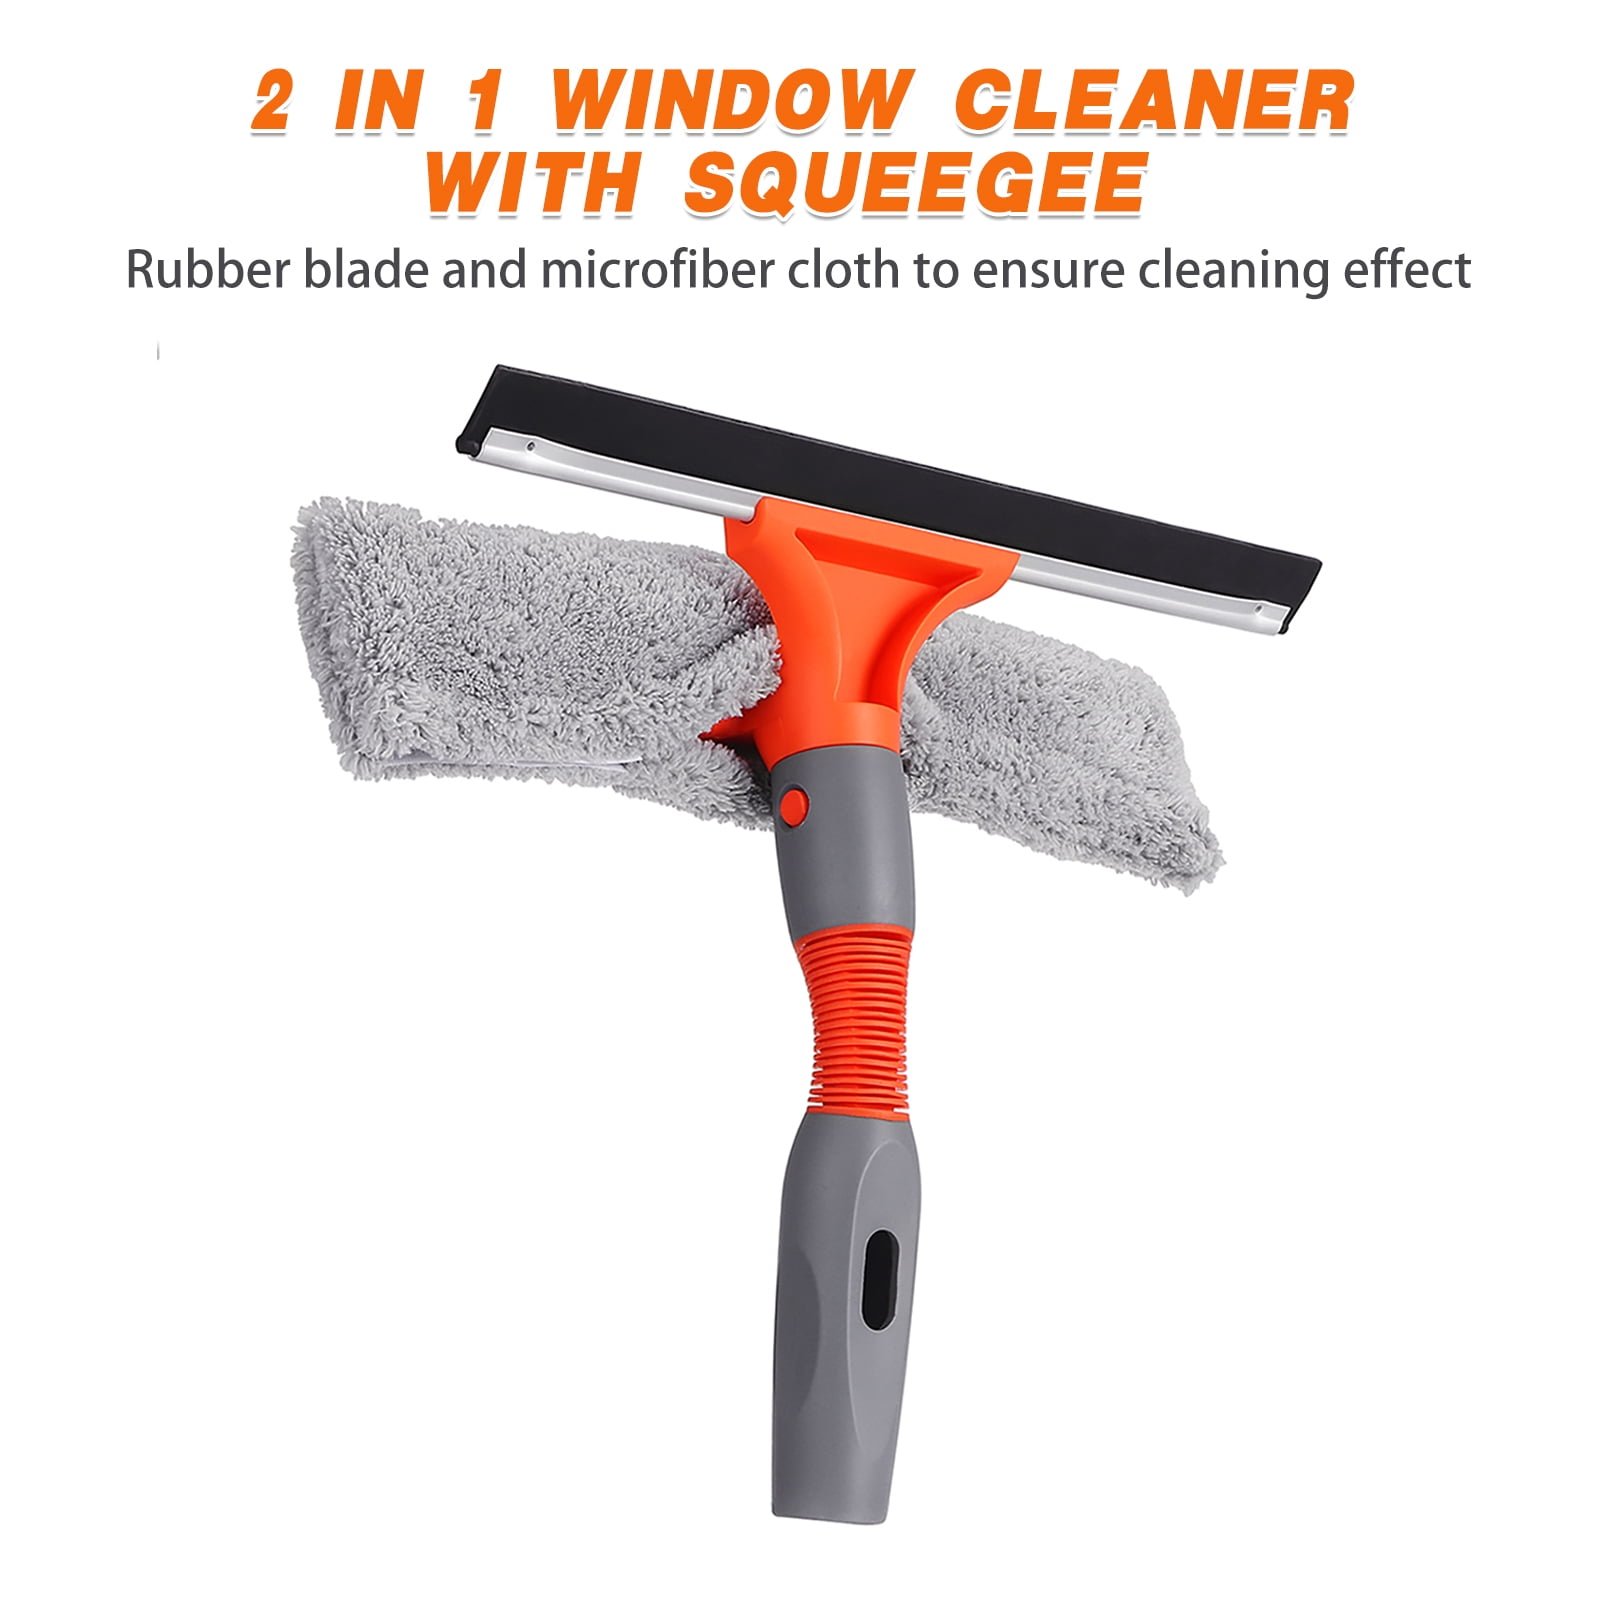 2-In-1 Window Squeegee For Car Washing - Auto Windshield Cleaning